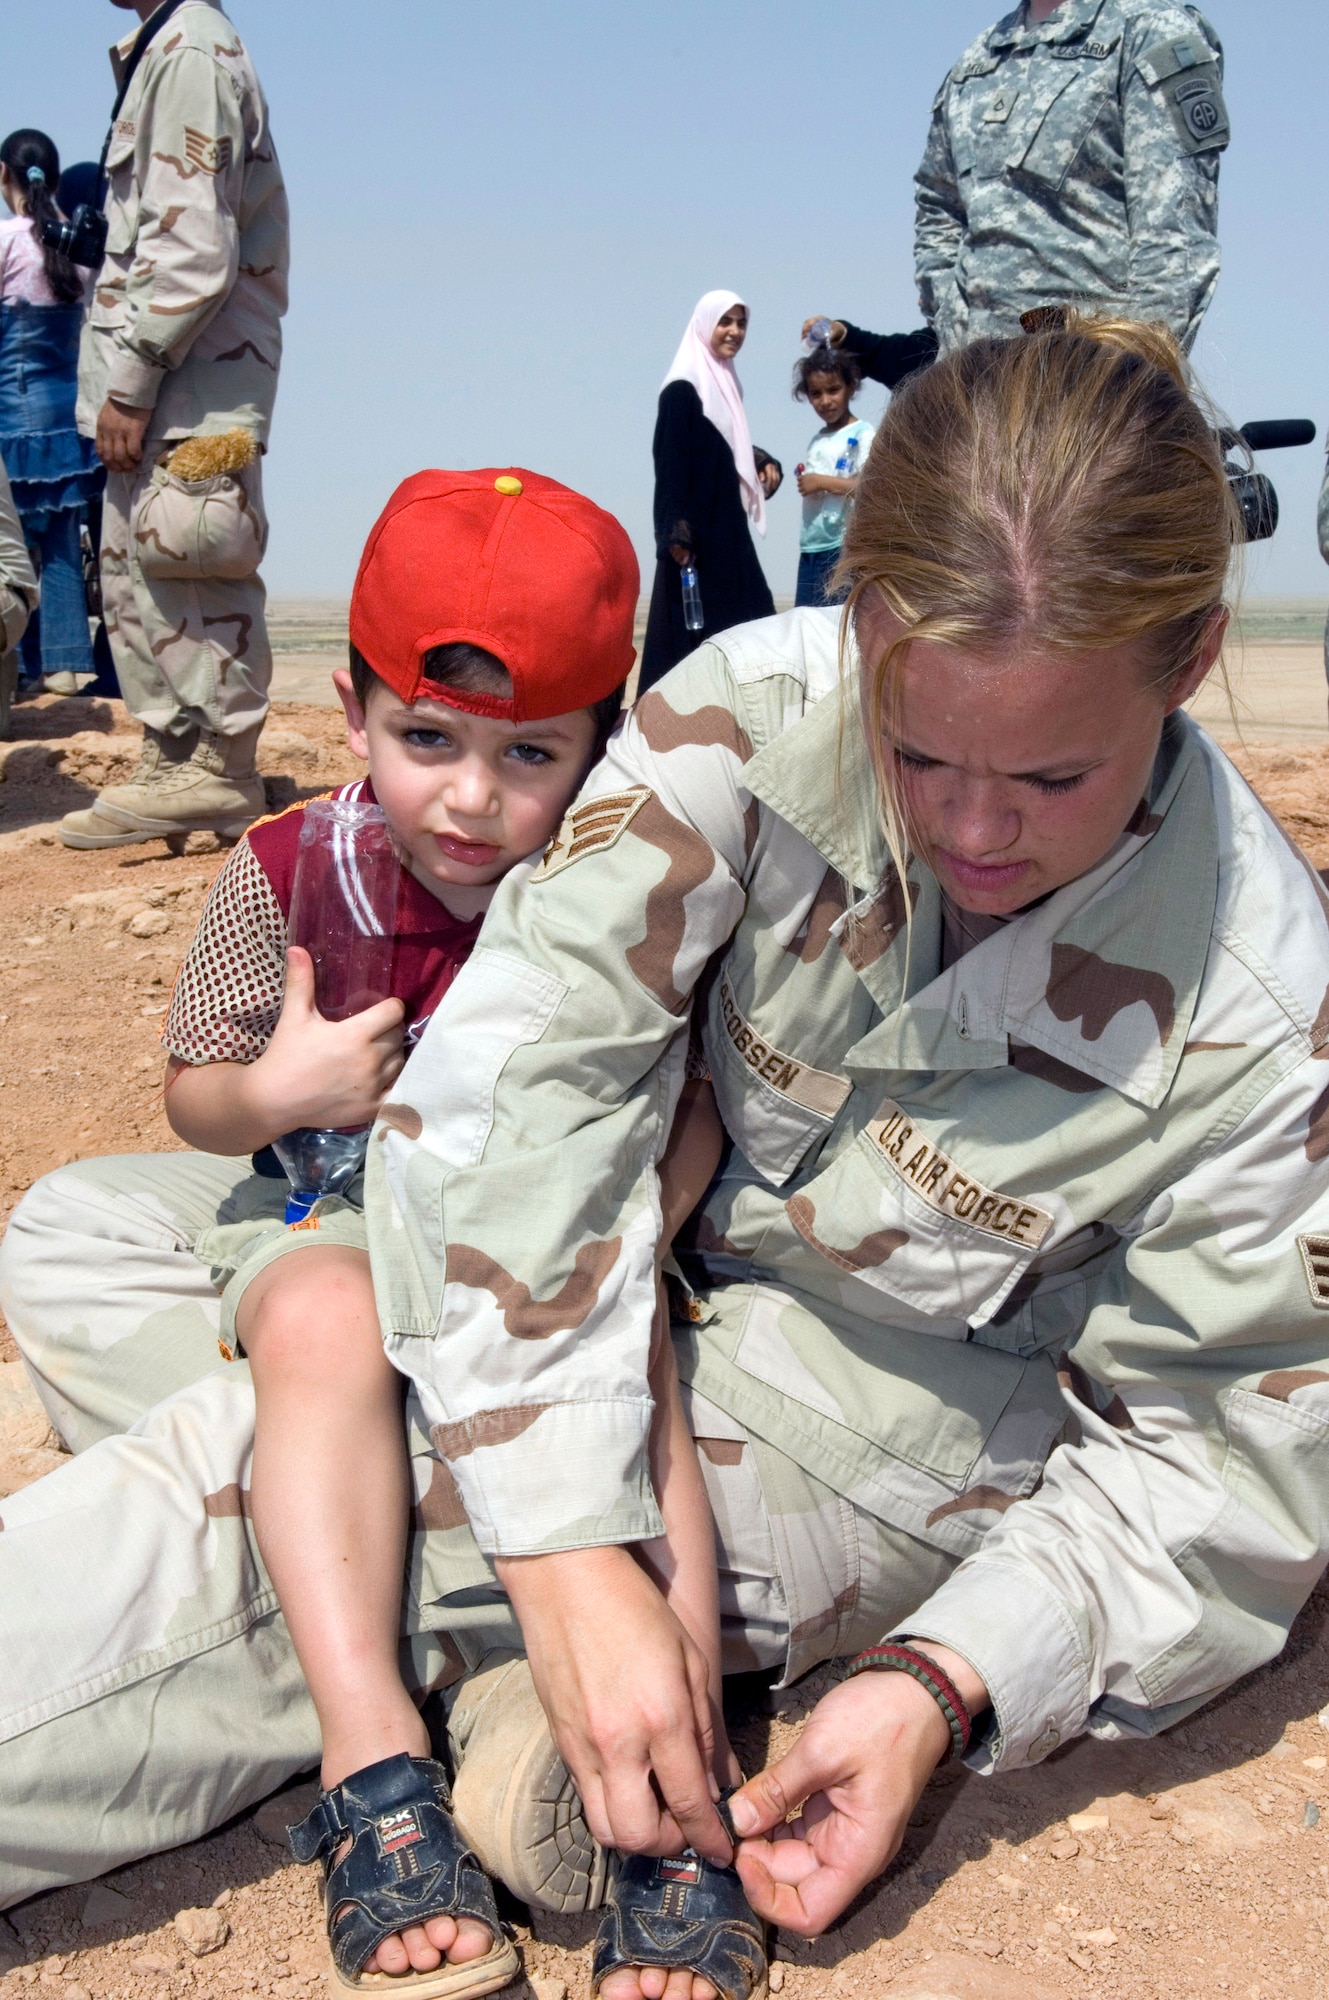 Senior Airman Ashley-Louise Jacobsen helps a young Iraqi boy get a rock out of his sandal during an Aug. 21 visit by 80 Iraqi nationals to the historical Ziggurat located on Ali Air Base, Iraq. The Ali AB First Four Council sponsored the visit. This is the first time in more than 10 years that Iraqi civilians have been allowed to step on the grounds of the historical site, which was built in the ancient city of Ur and includes the house of the biblical prophet Abraham. Airman Jacobsen is a member of the 407th Expeditionary Logistics Readiness Squadron at Ali AB. (U.S. Air Force photo/Master Sgt. Robert W. Valenca) 